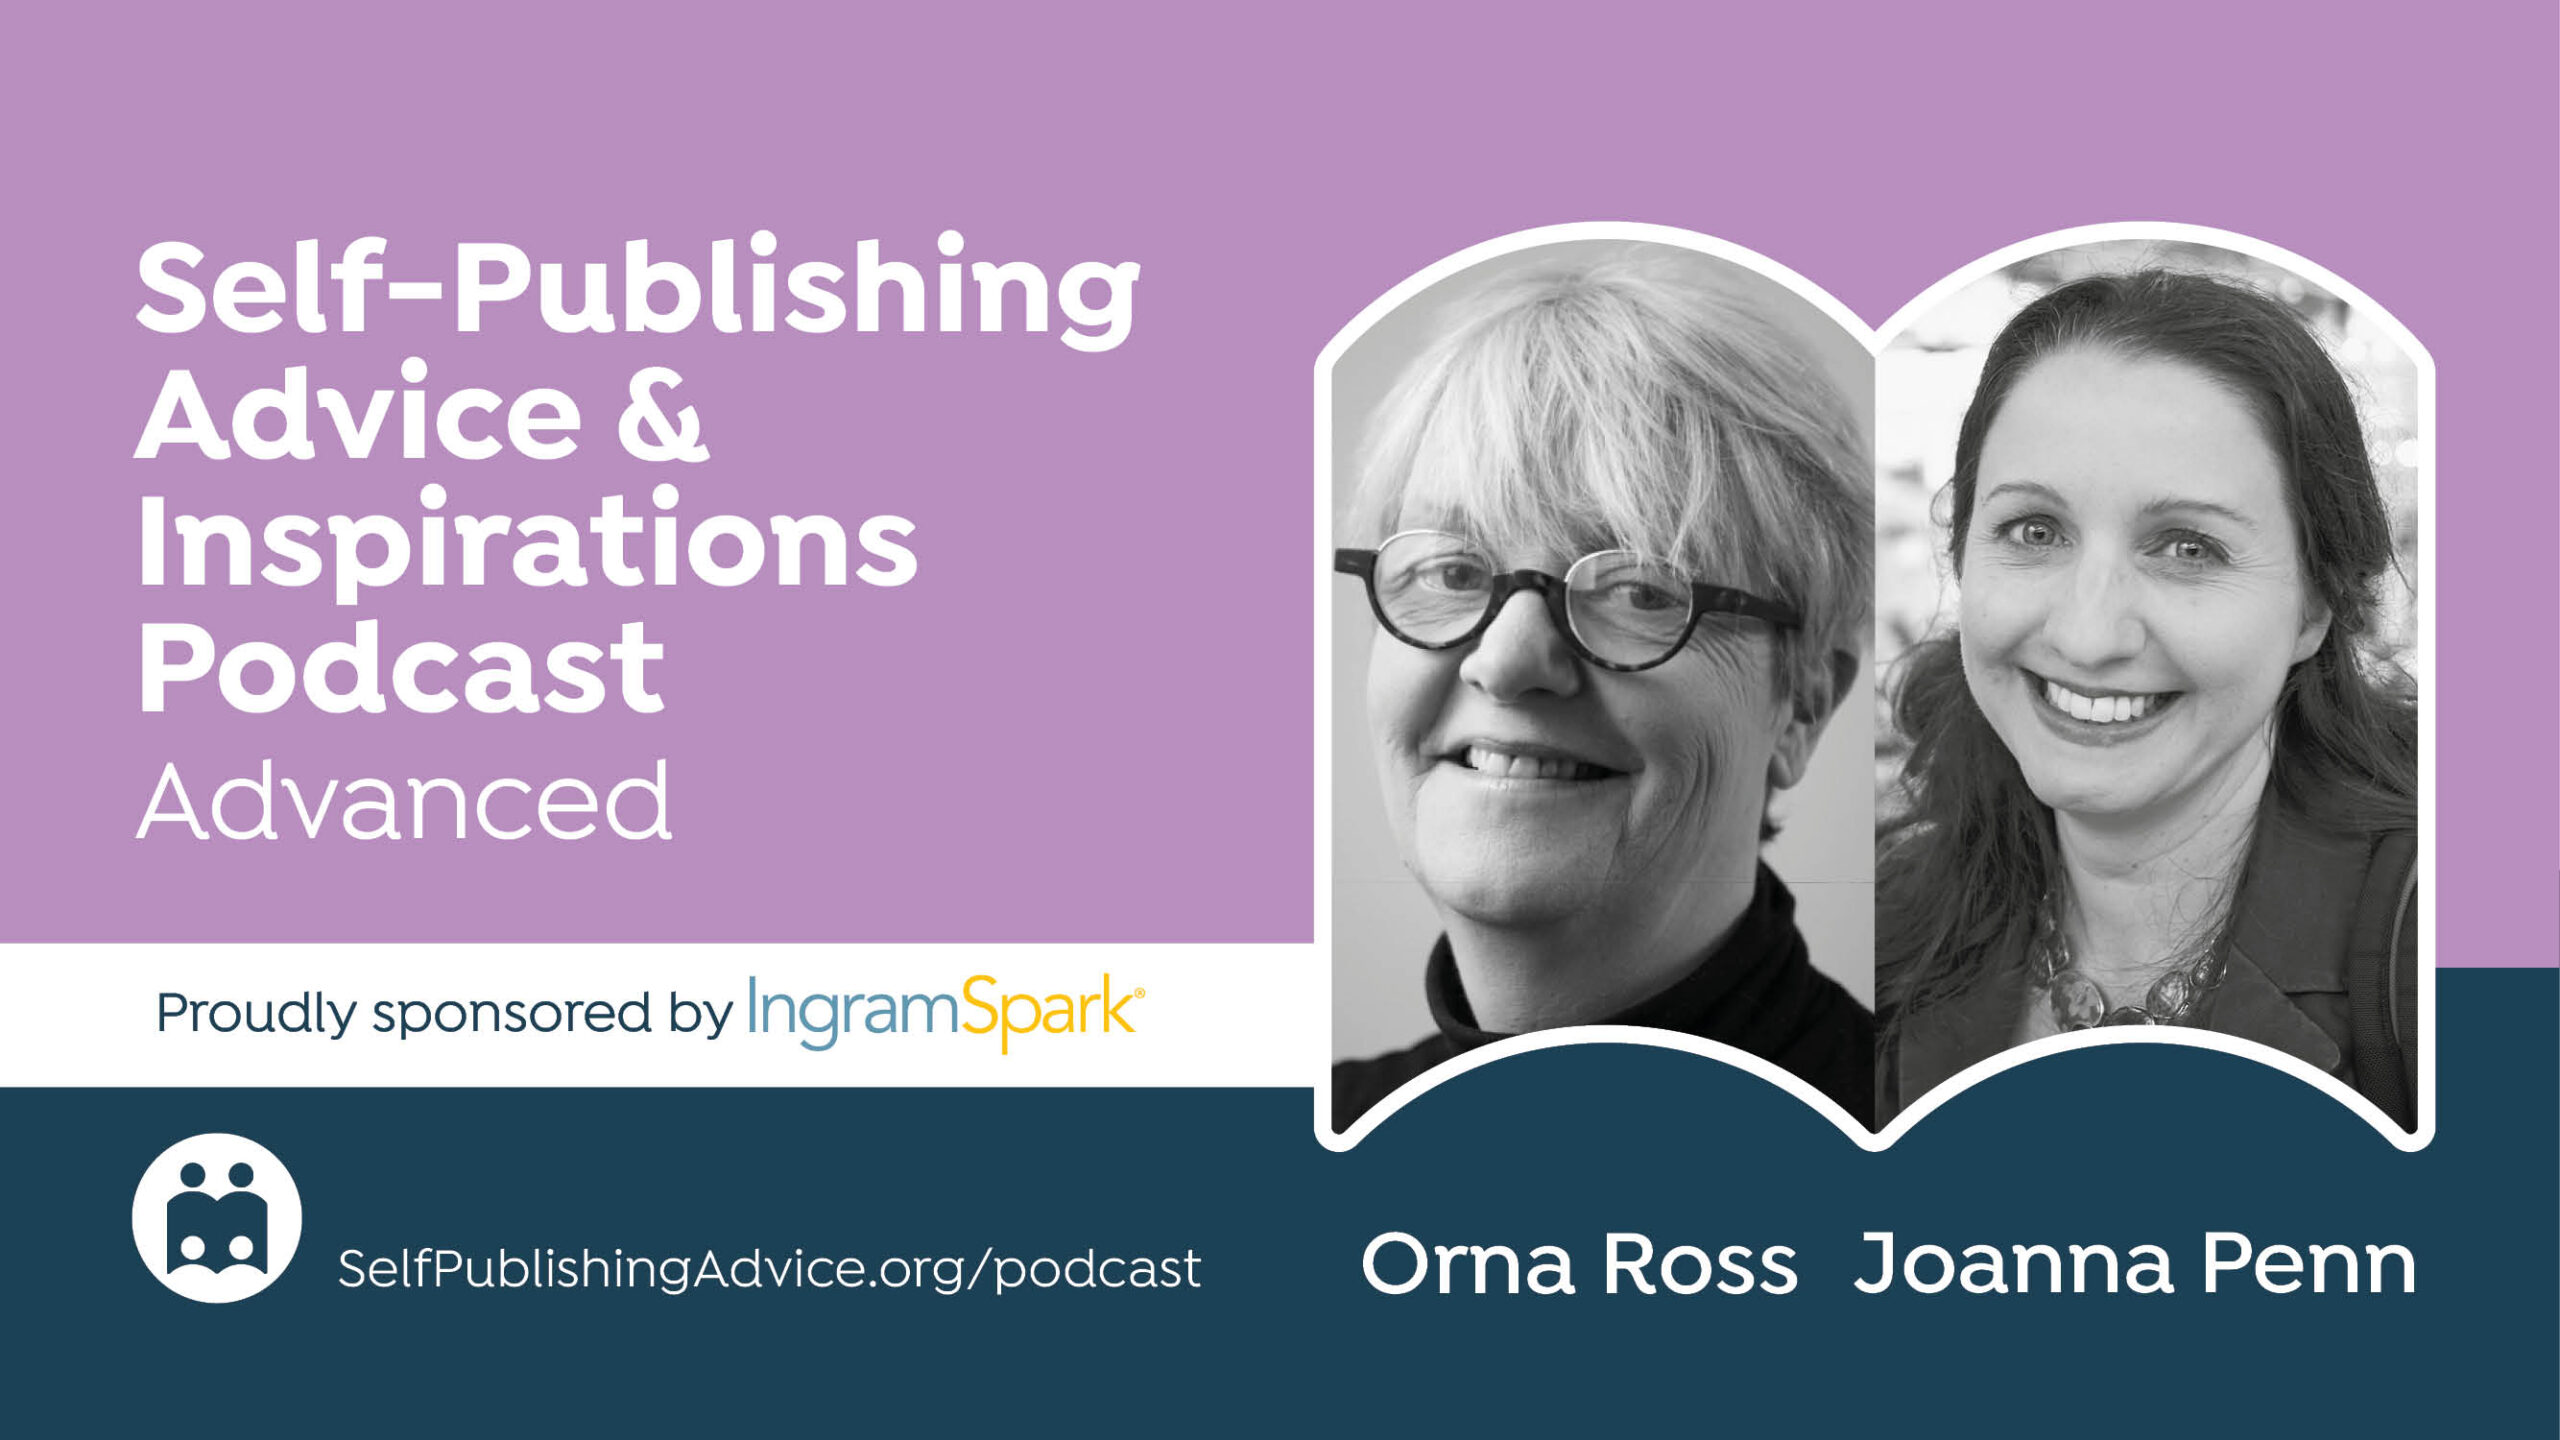 Optimizing Your Creative Energy — Starting, Focusing, Finishing: Advanced Self-Publishing Podcast With Orna Ross And Joanna Penn